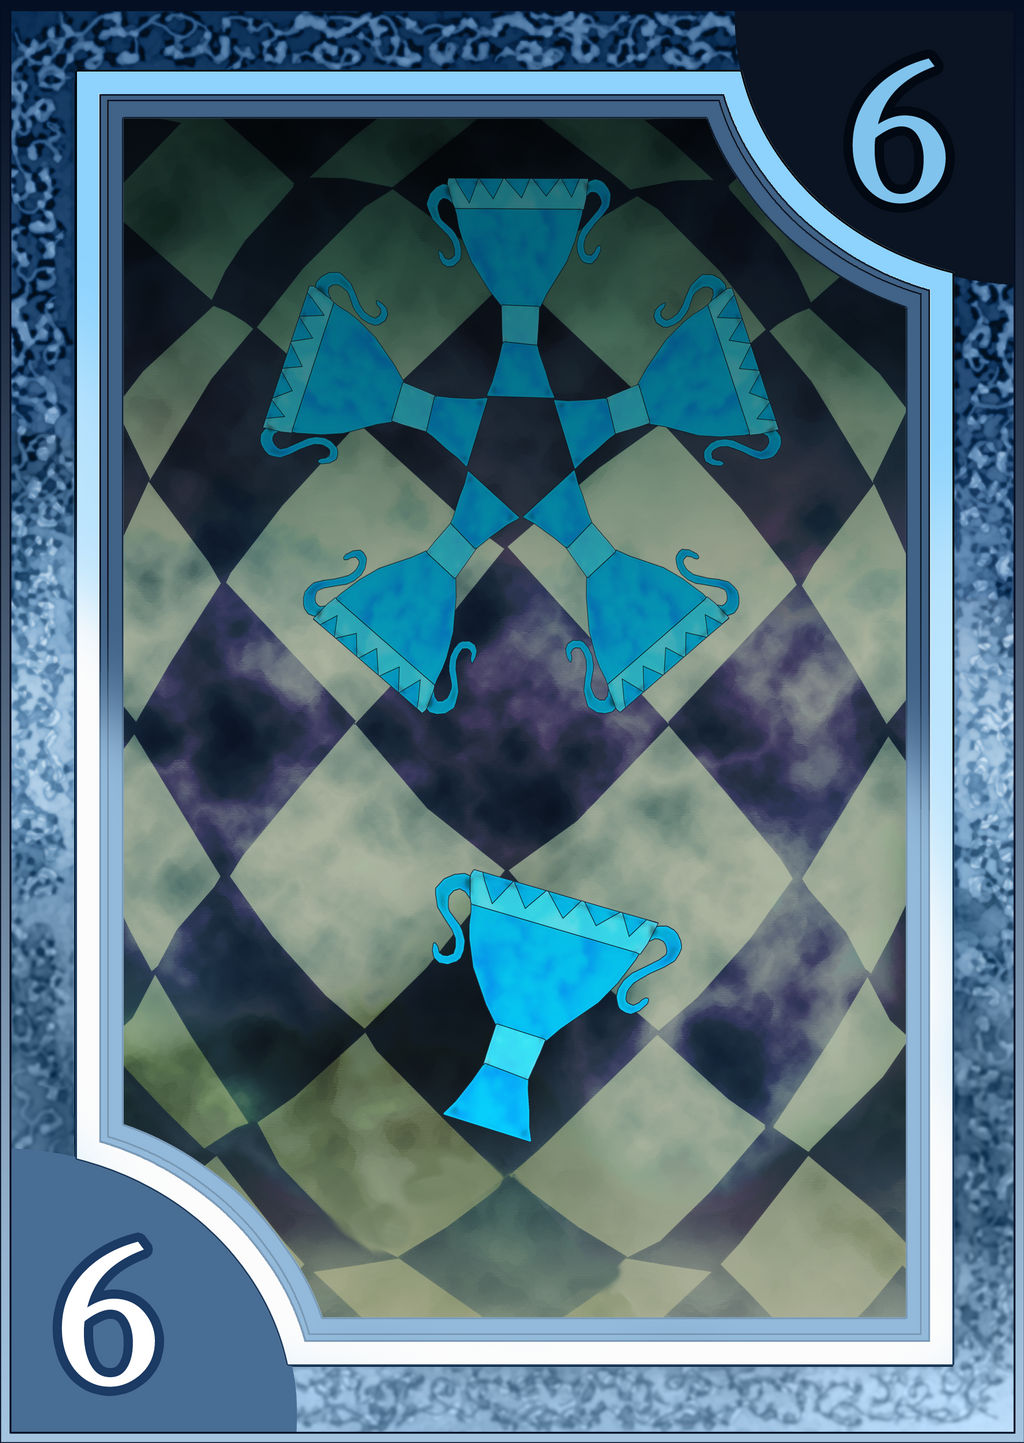 Persona 3/4 Tarot Card Deck HR - Suit of Cups 6 by Enetirnel on DeviantArt